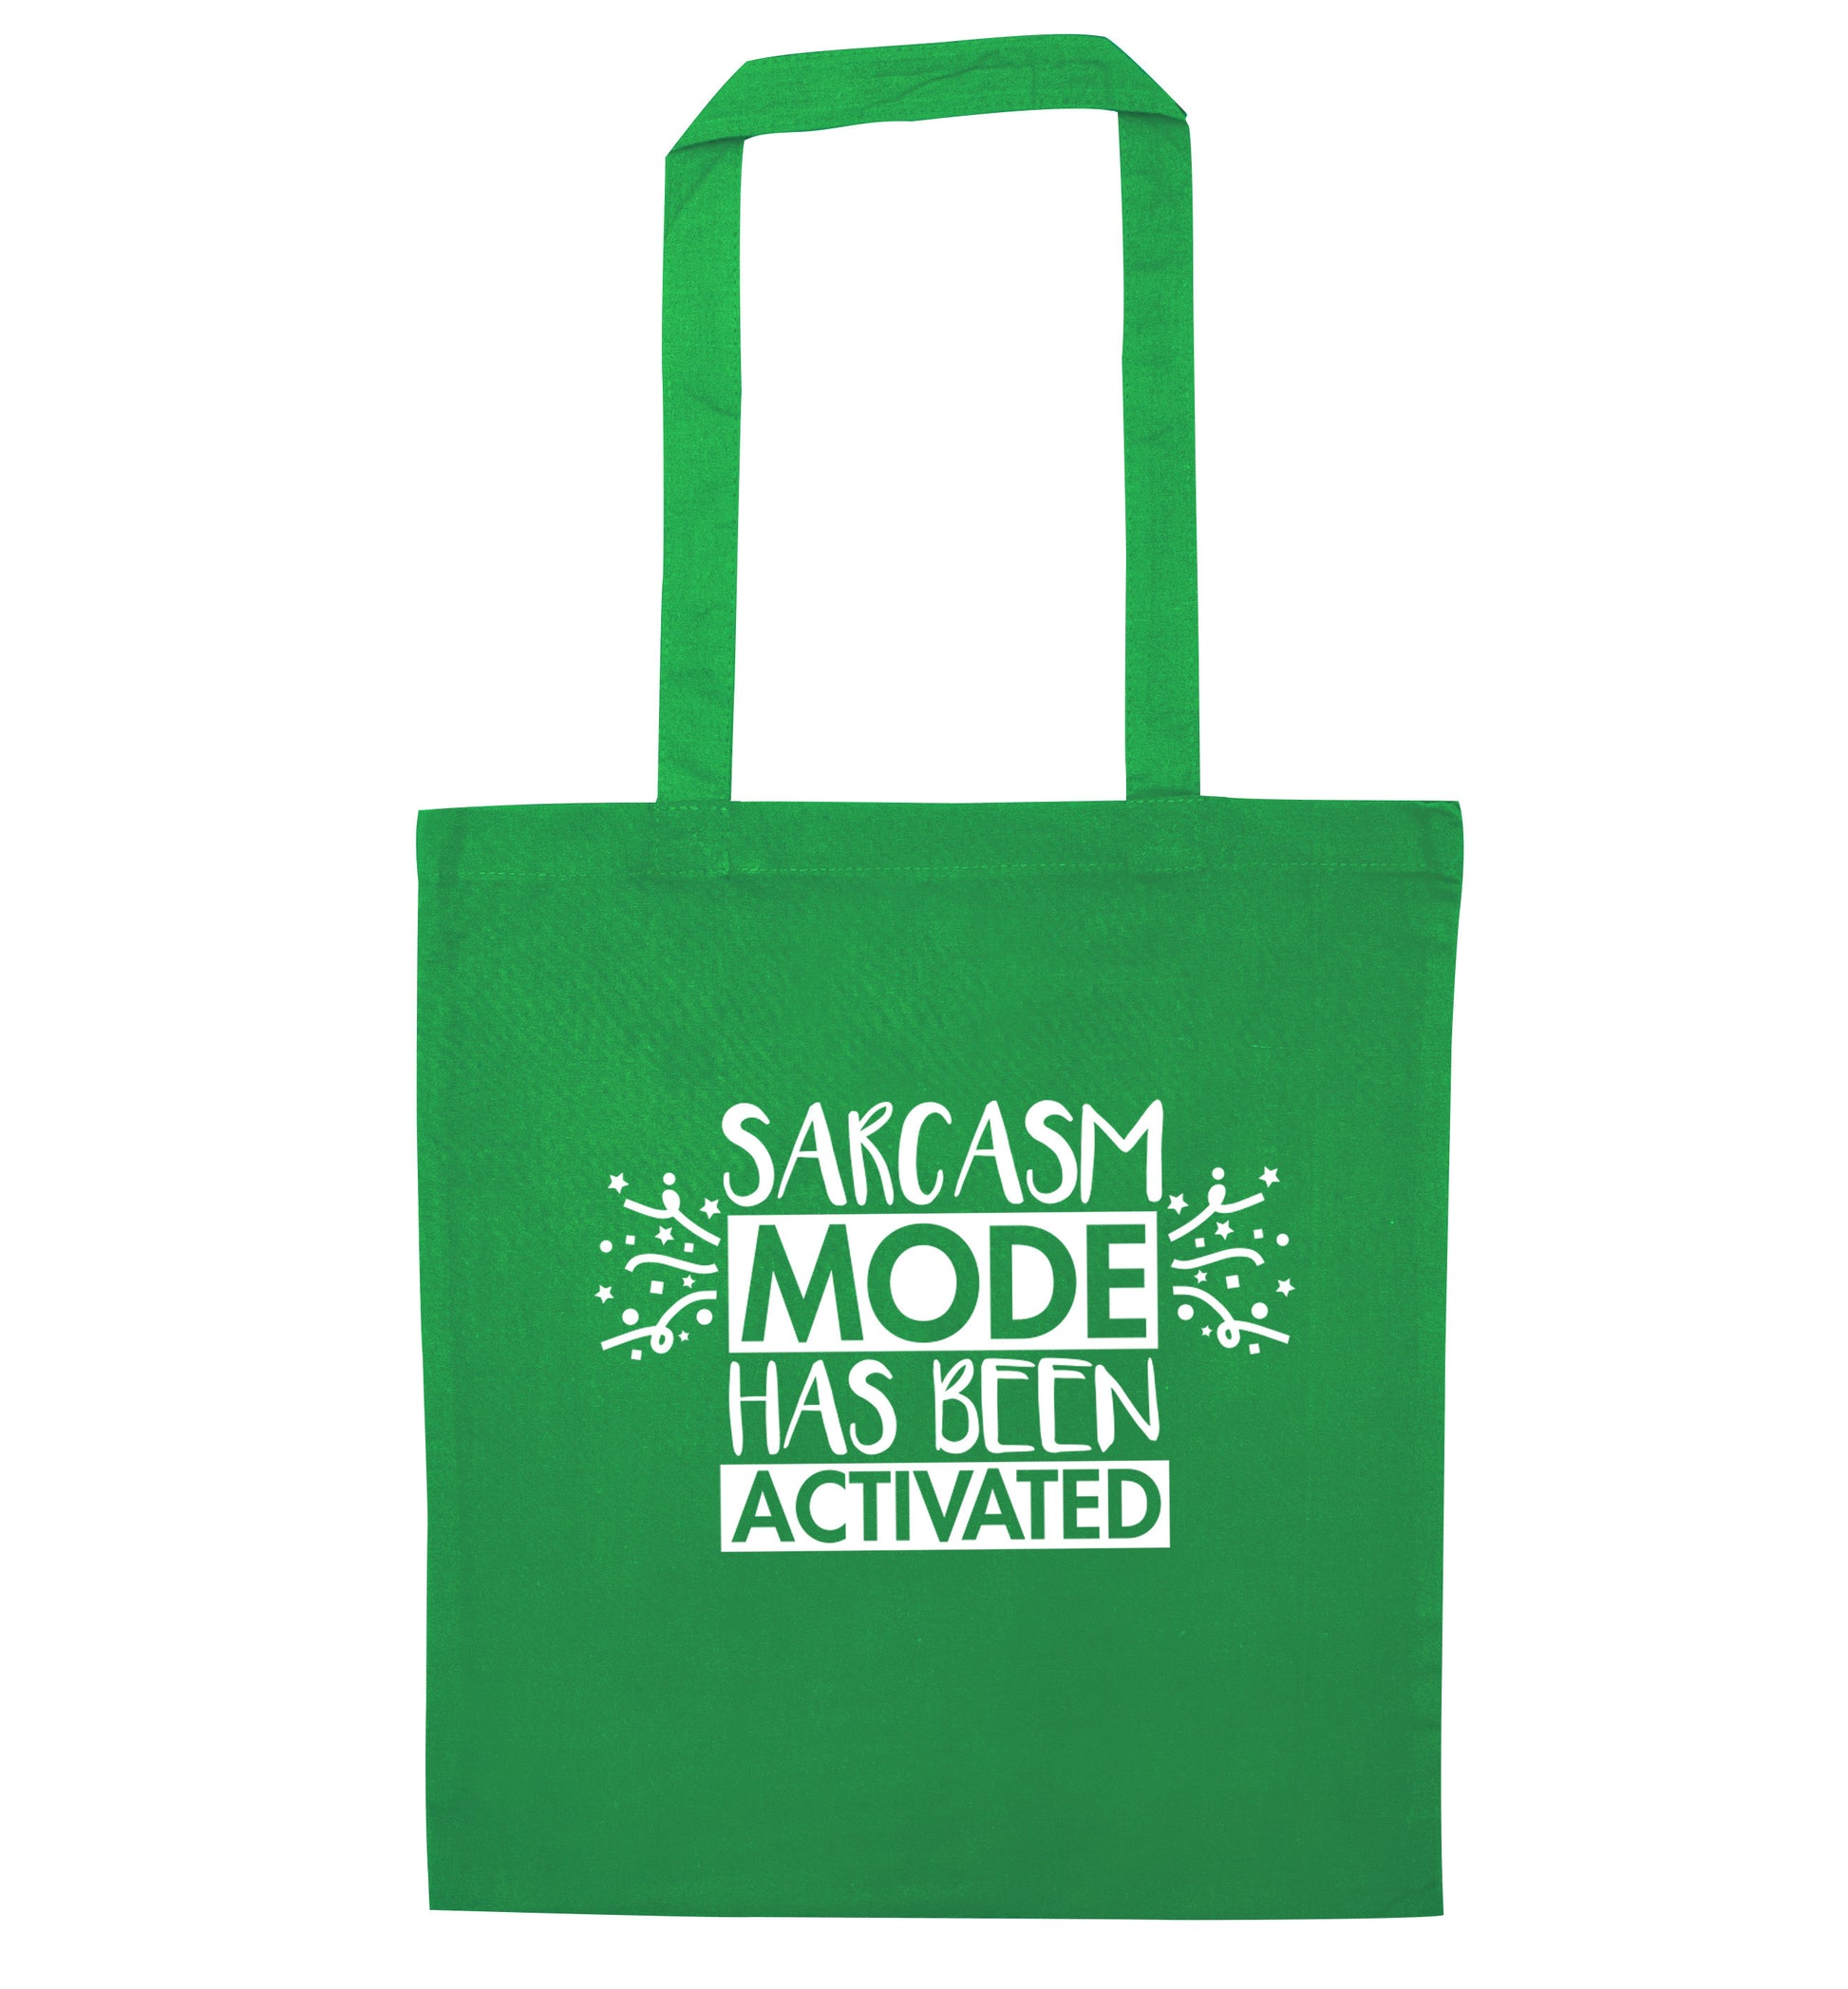 Sarcarsm mode has been activated green tote bag